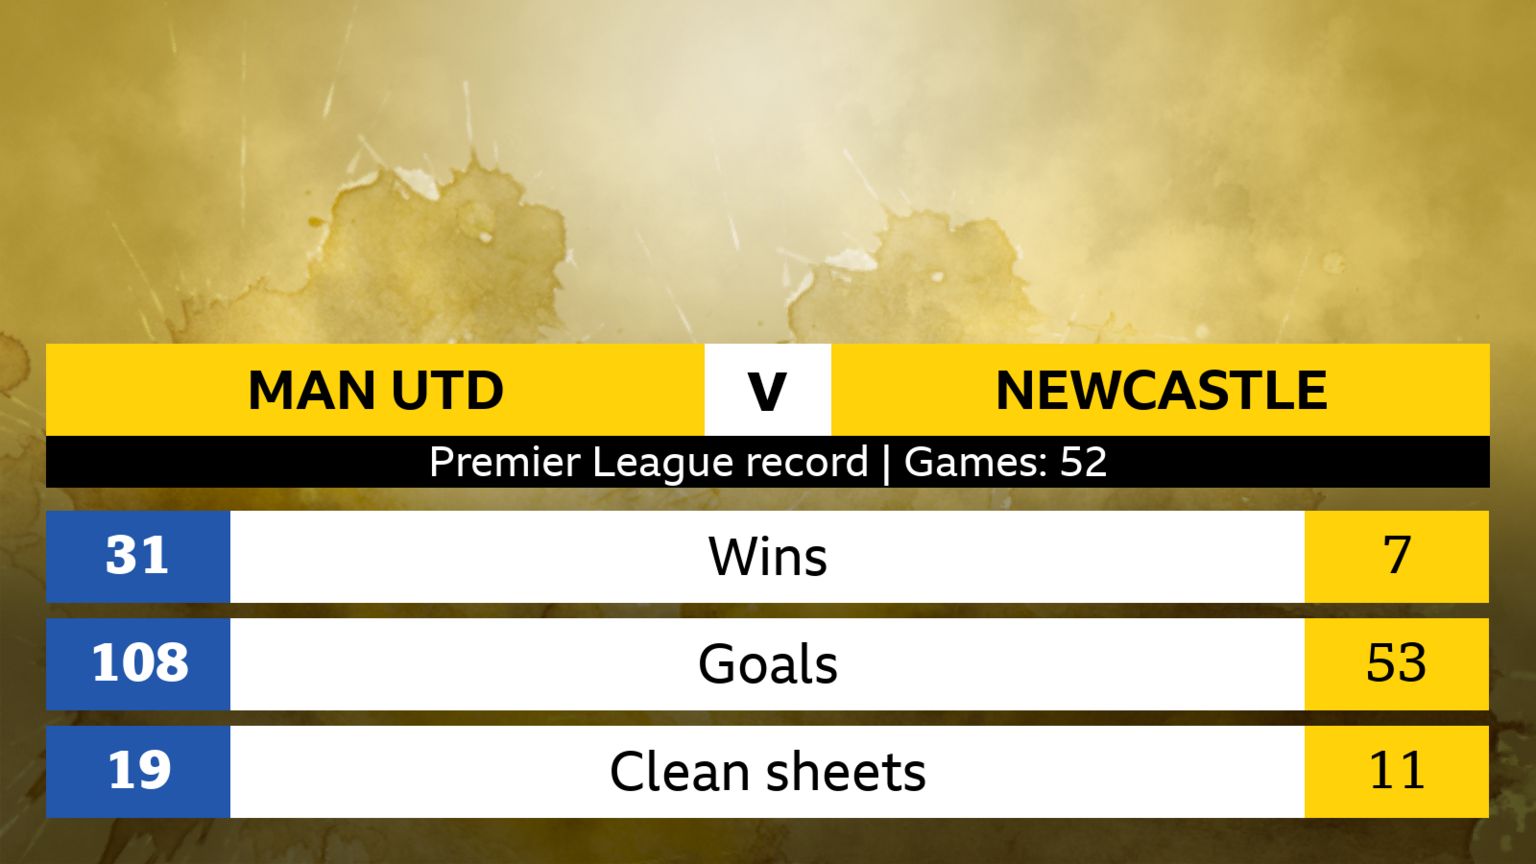 Man Utd v Newcastle, head-to-head stats over 52 Premier League meetings (Man Utd number first):  Wins 31-7; Goals 108-53; Clean sheets 19-11